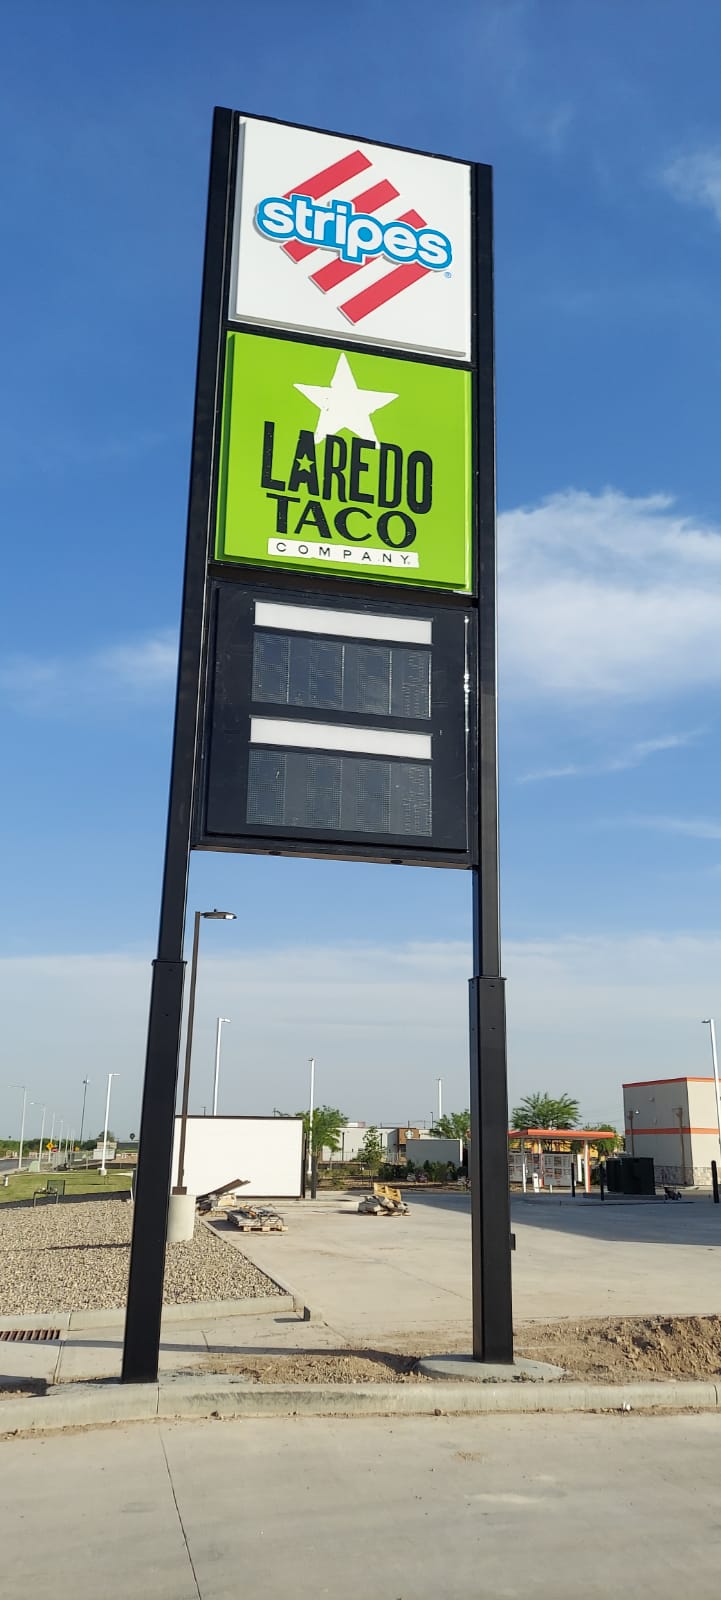 Prominent pylon display for Stripes and Laredo Taco Company, highlighting brand presence and service offerings.